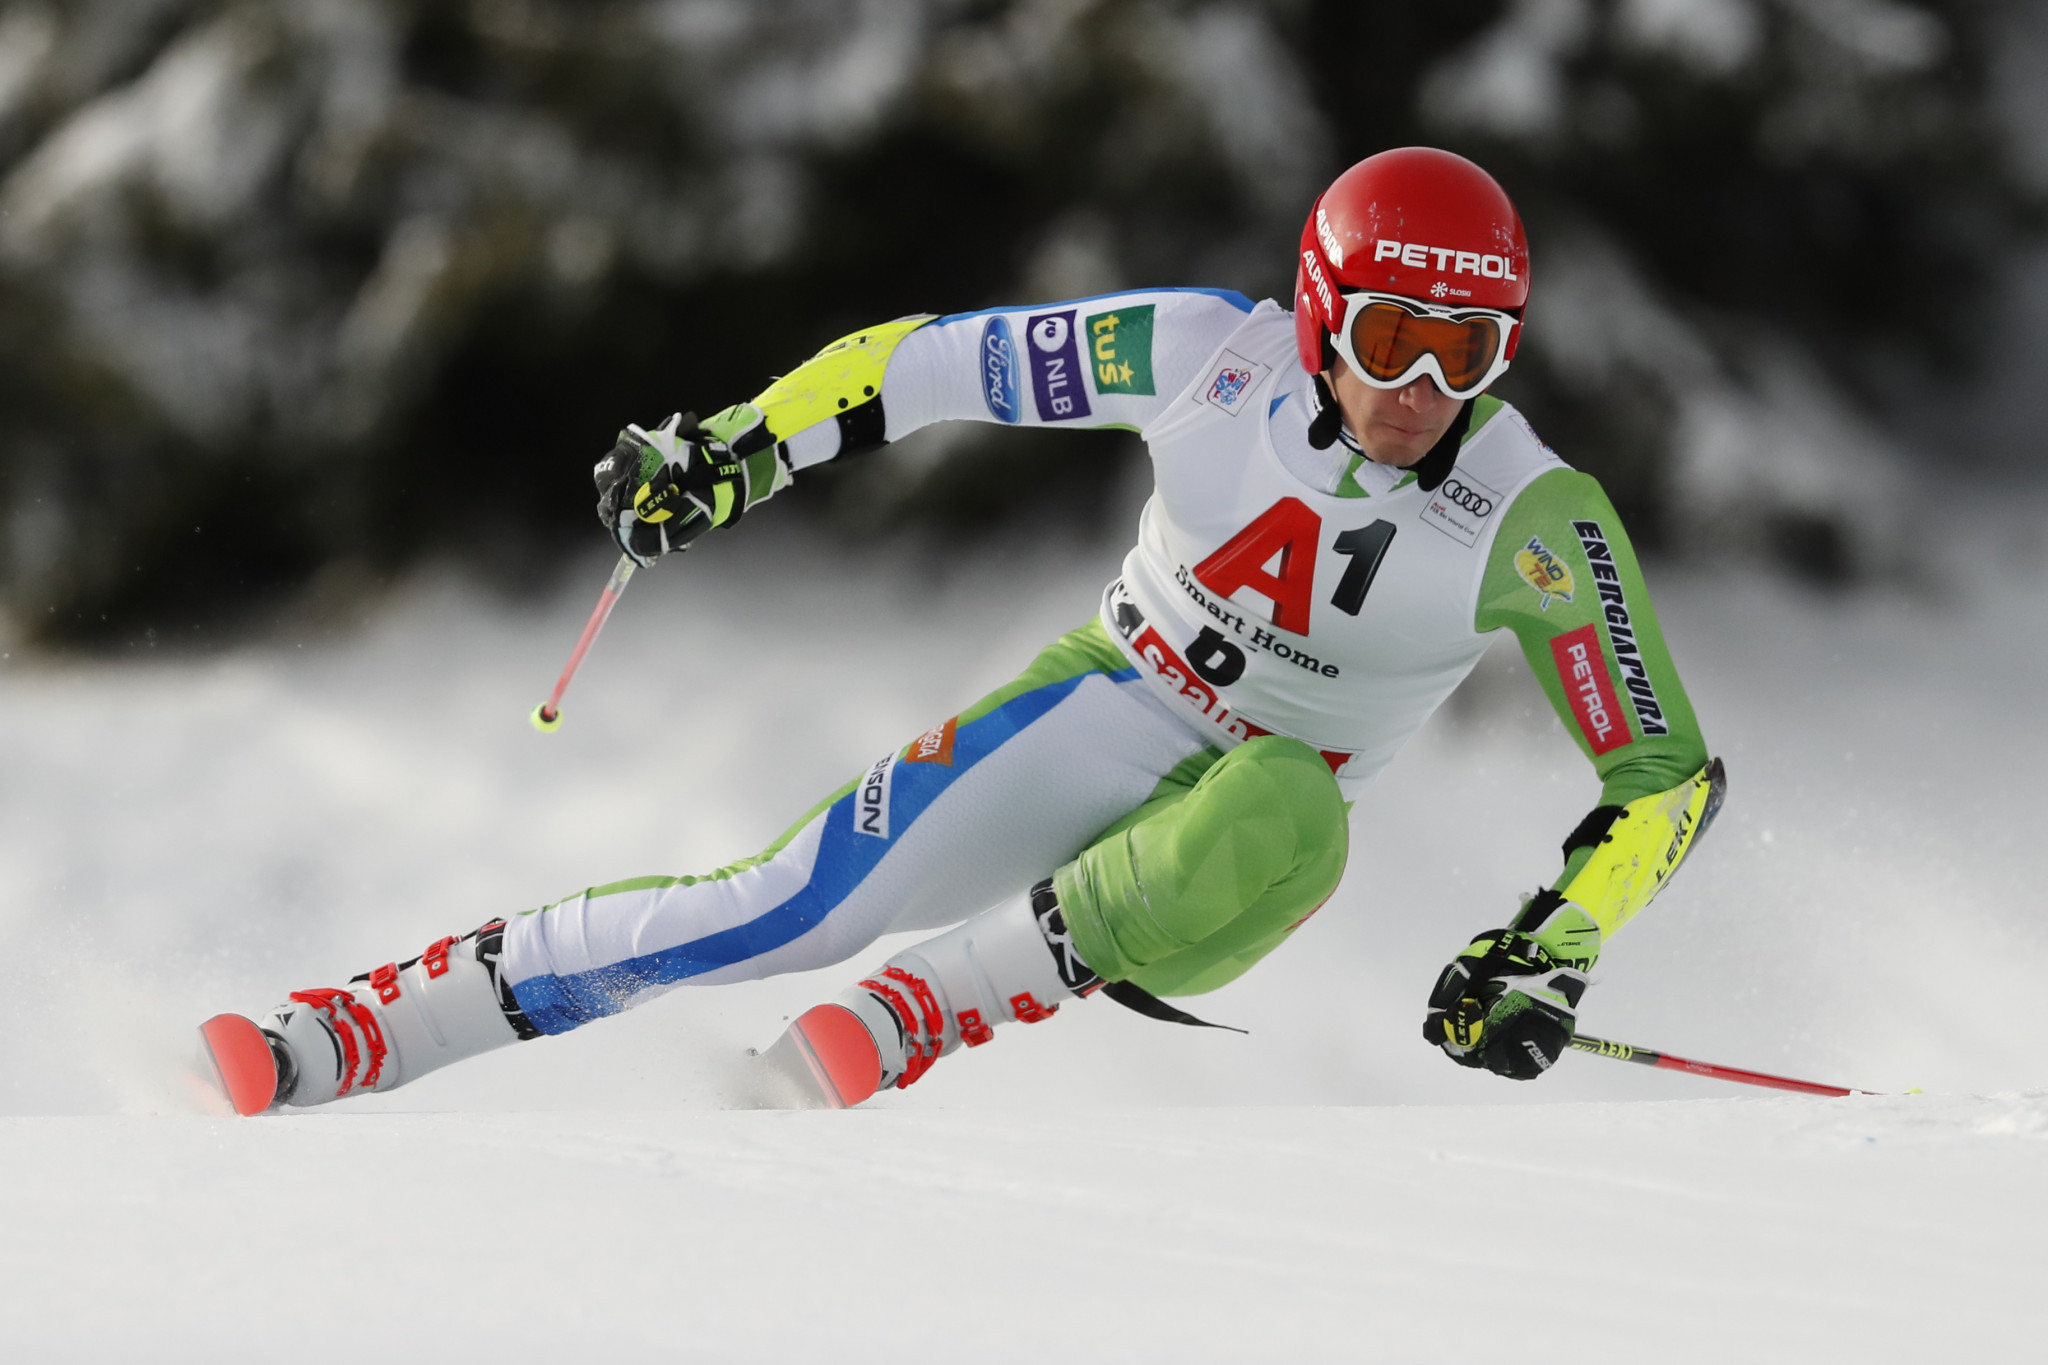 Kranjec claims career-first giant slalom win at Alpine Skiing World Cup as Hirscher settles for sixth